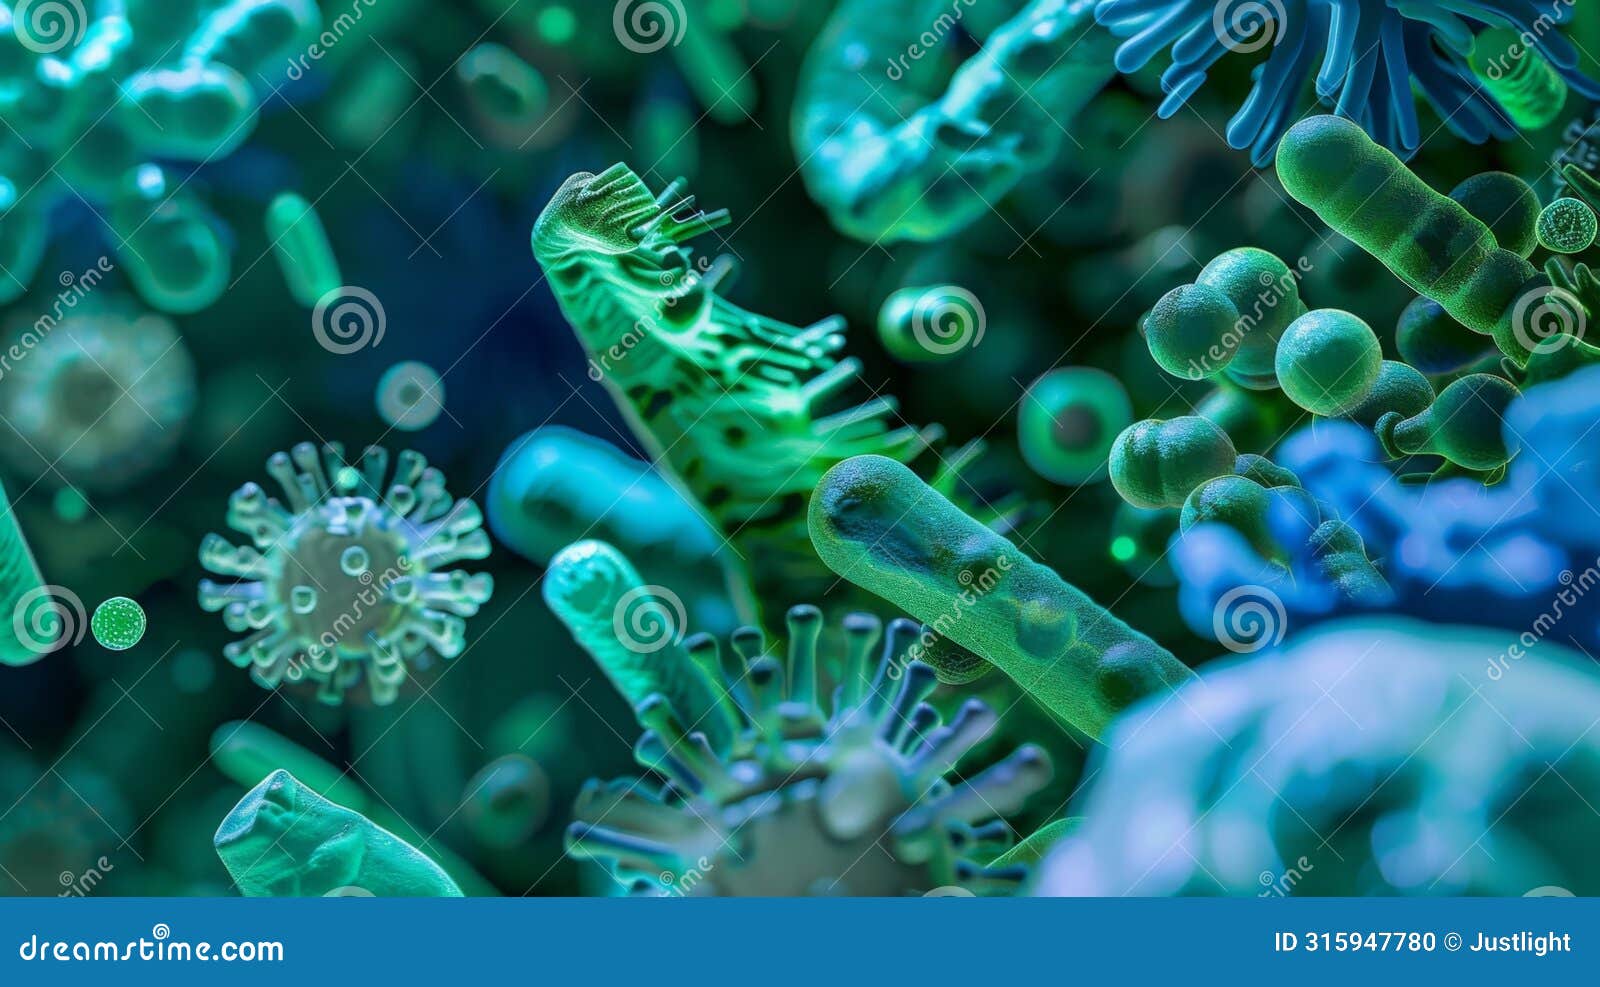 an image of bacterial aggregates in varying shades of green and blue highlighting the diverse microbial species present